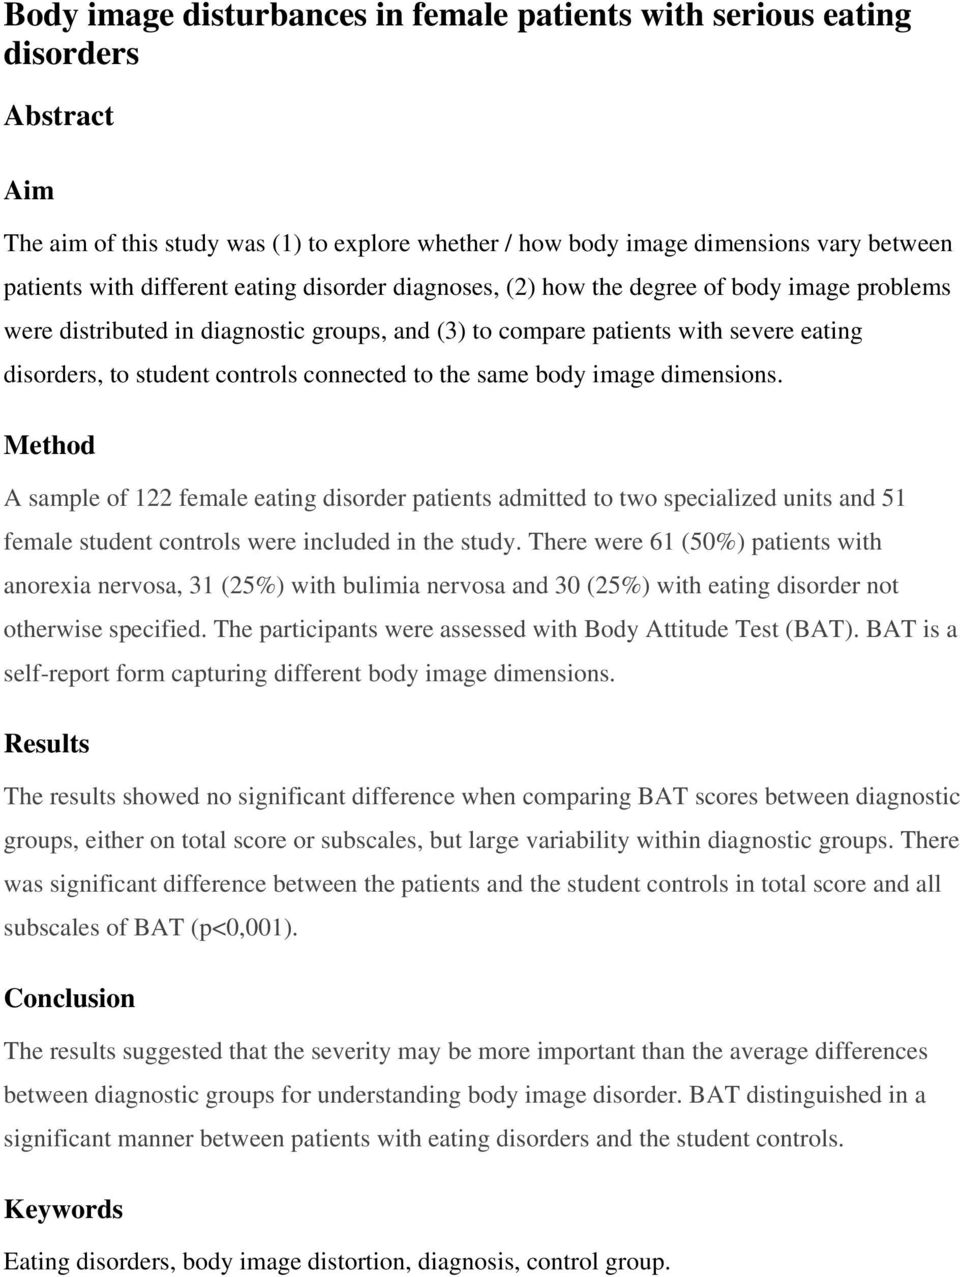 the same body image dimensions. Method A sample of 122 female eating disorder patients admitted to two specialized units and 51 female student controls were included in the study.